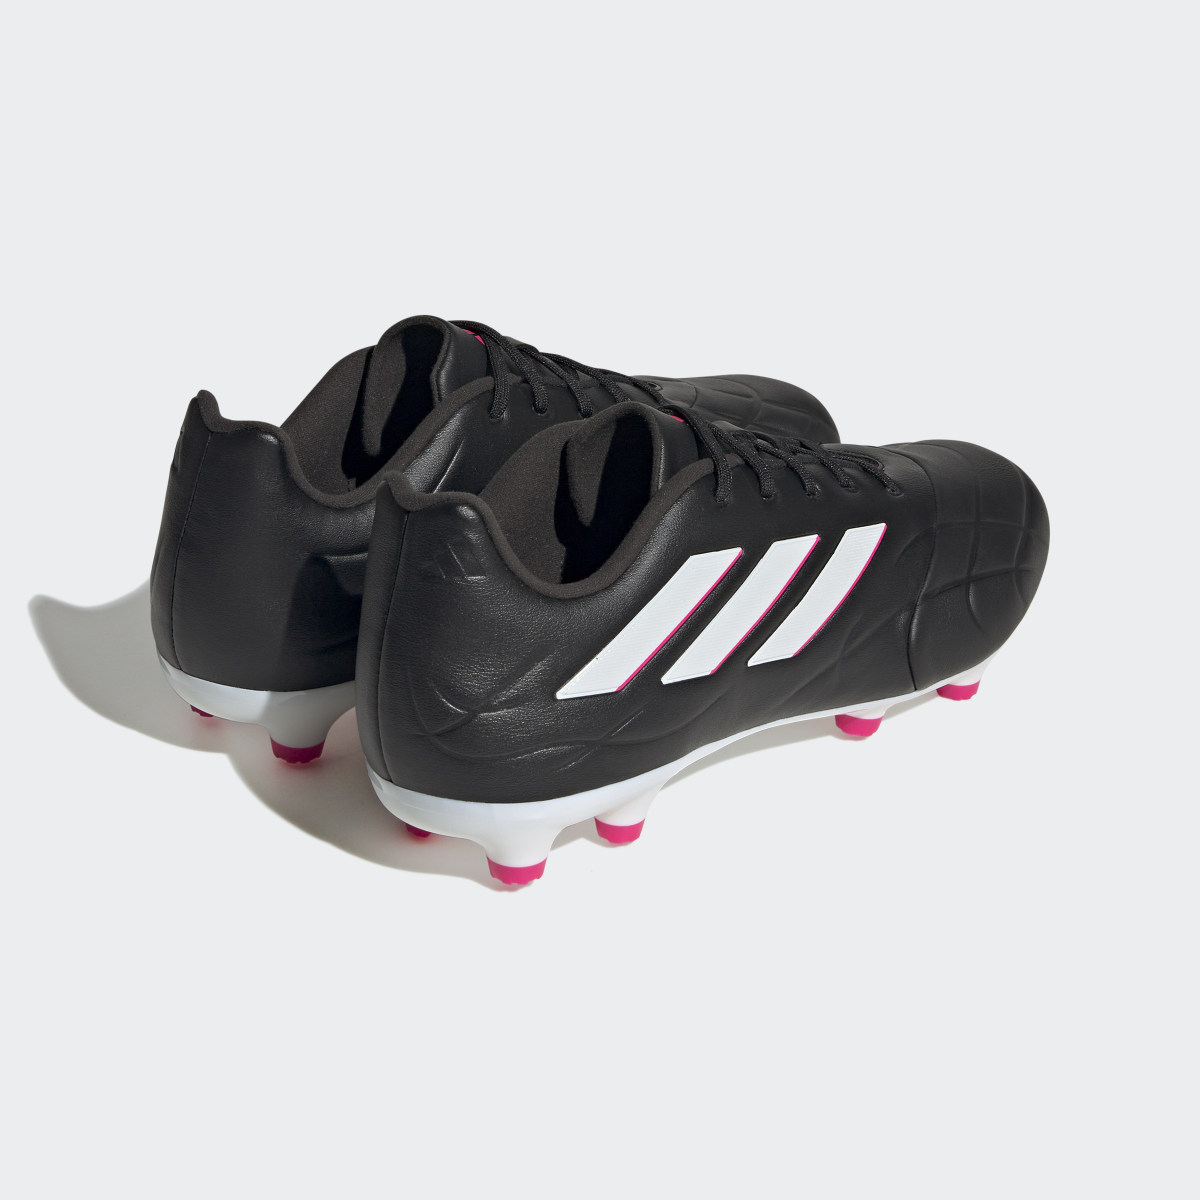 Adidas Copa Pure.3 Firm Ground Boots. 9